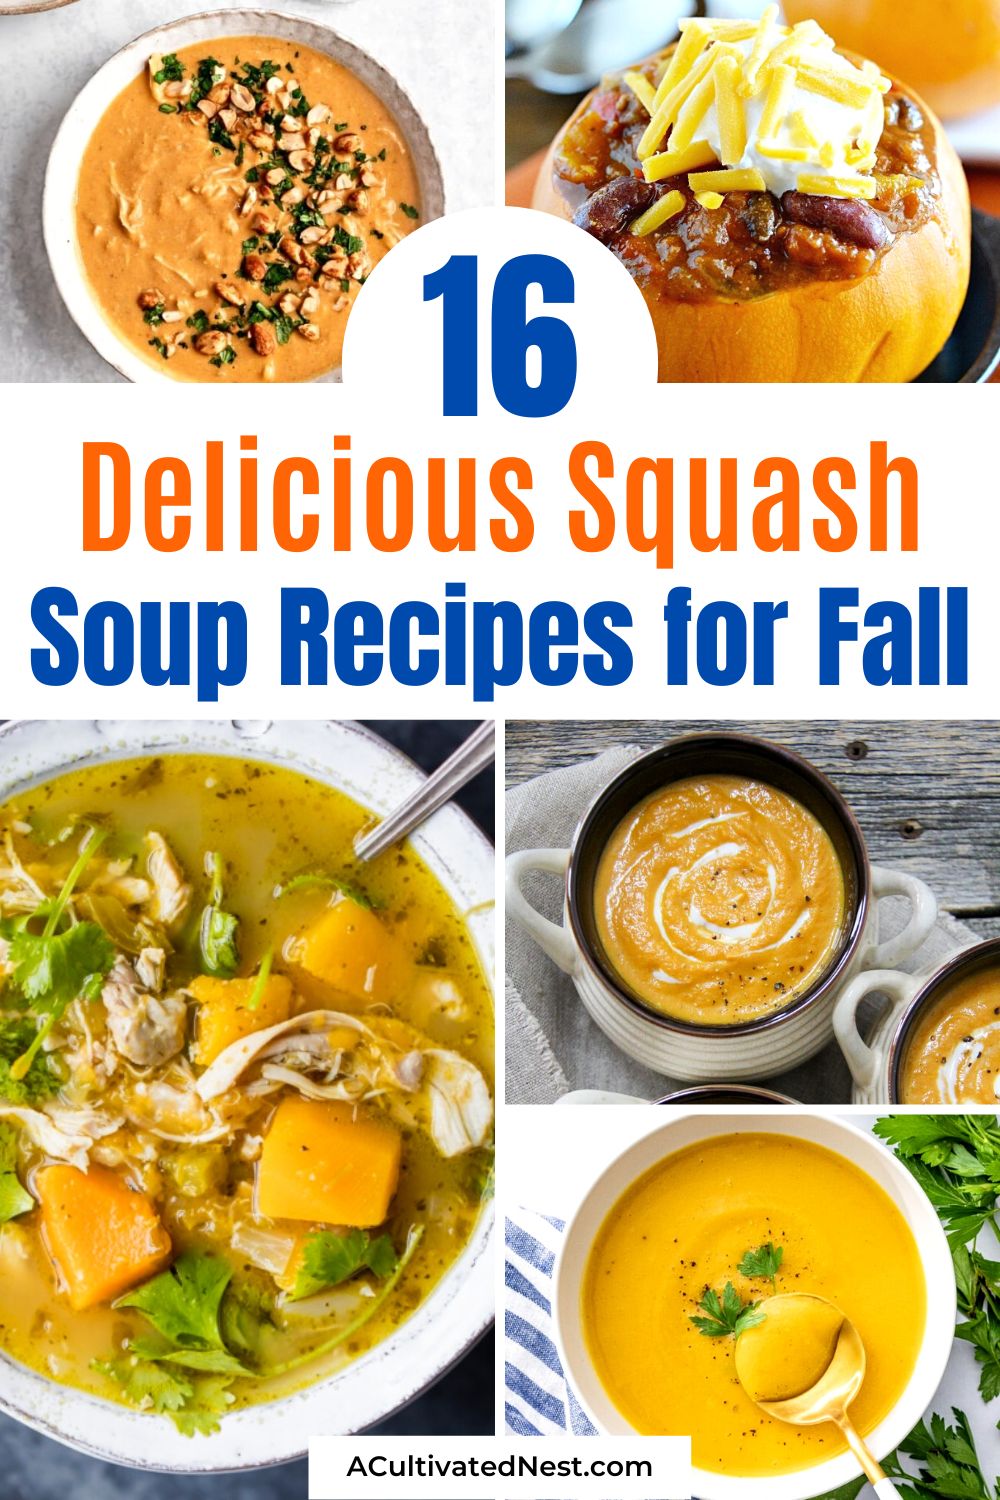 16 Delicious Fall Squash Soup Recipes- Soup season is here, and we've gathered some scrumptious fall squash soup recipes to delight your taste buds. Whether you prefer velvety textures or bold flavors, you'll find a soup that warms your soul in this collection. Embrace the autumn vibes! | #FallCooking #SquashRecipes #SoupLovers #fallRecipes #ACultivatedNest